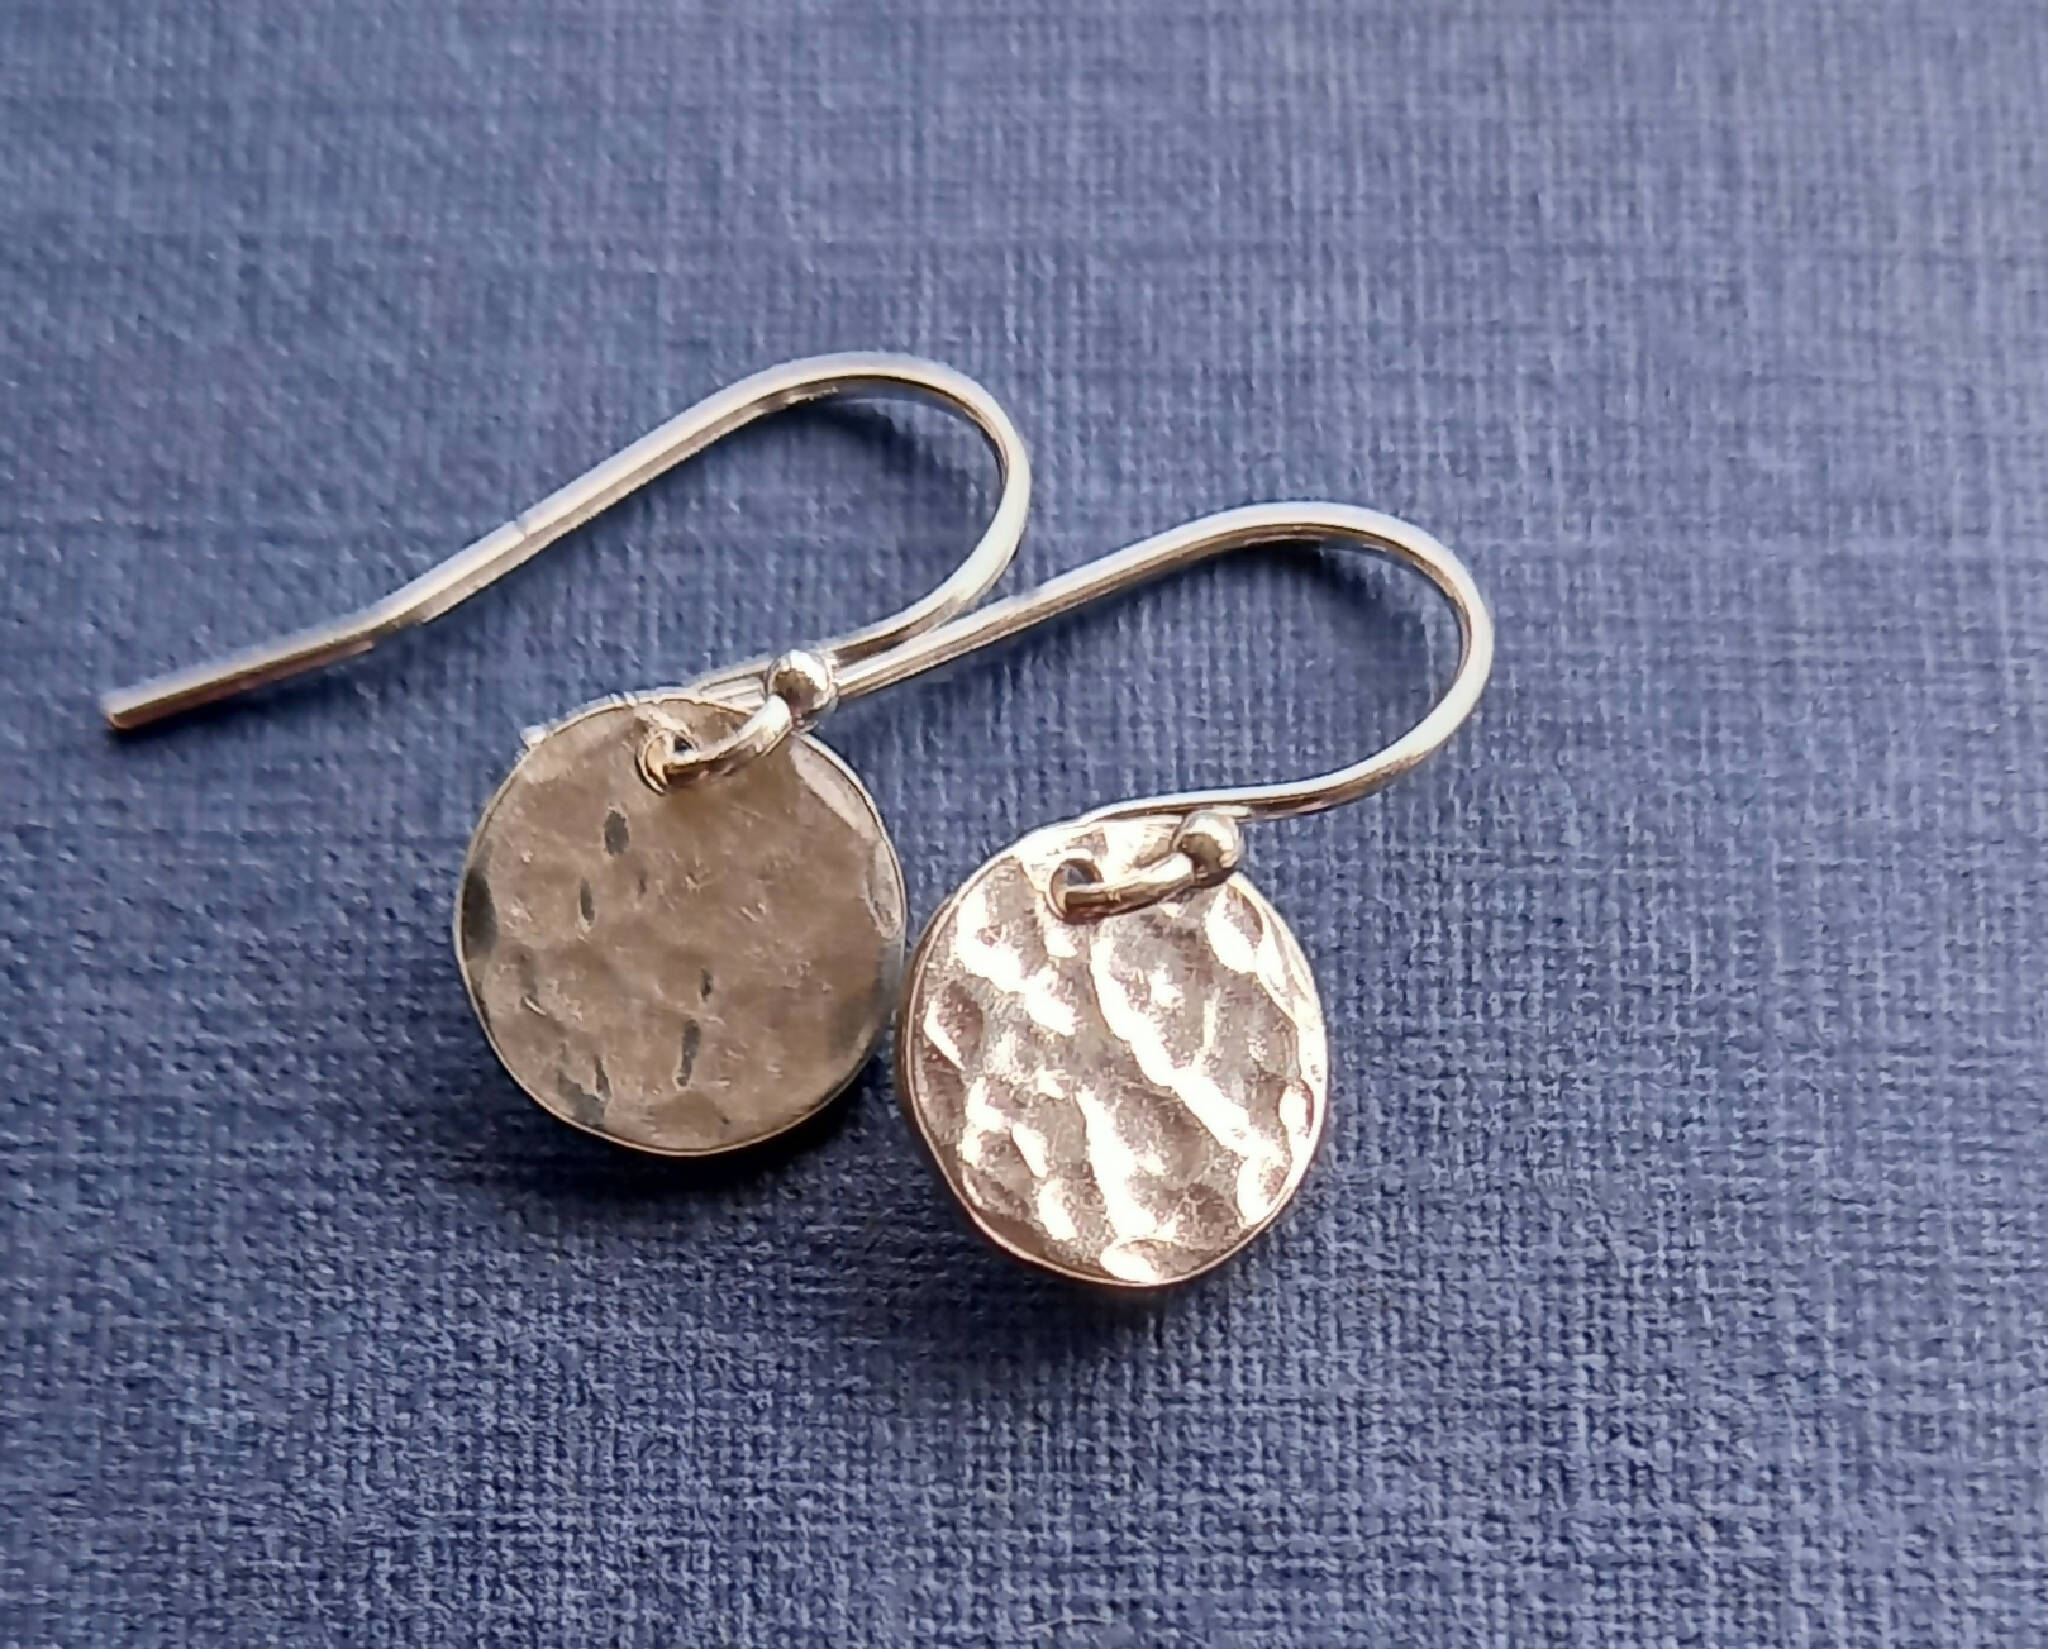 Hammered silver earrings.